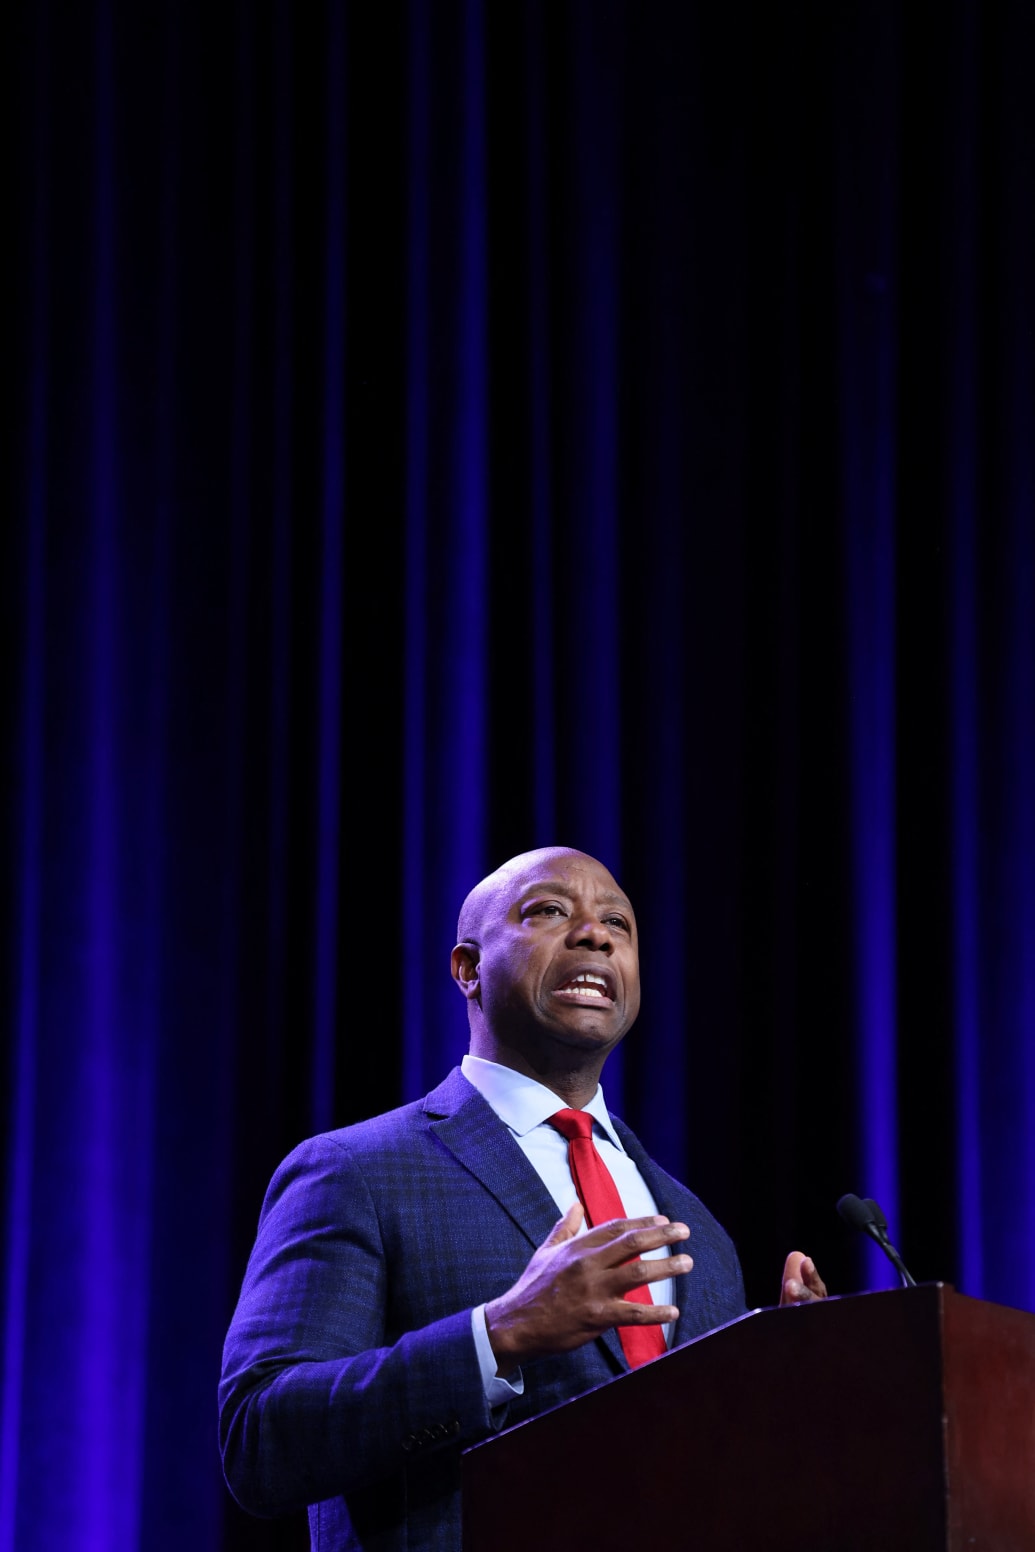 U.S. Senator and Republican presidential candidate Tim Scott (R-SC)  speaks at the Republican Party of Iowa's Lincoln Day Dinner in Des Moines, Iowa